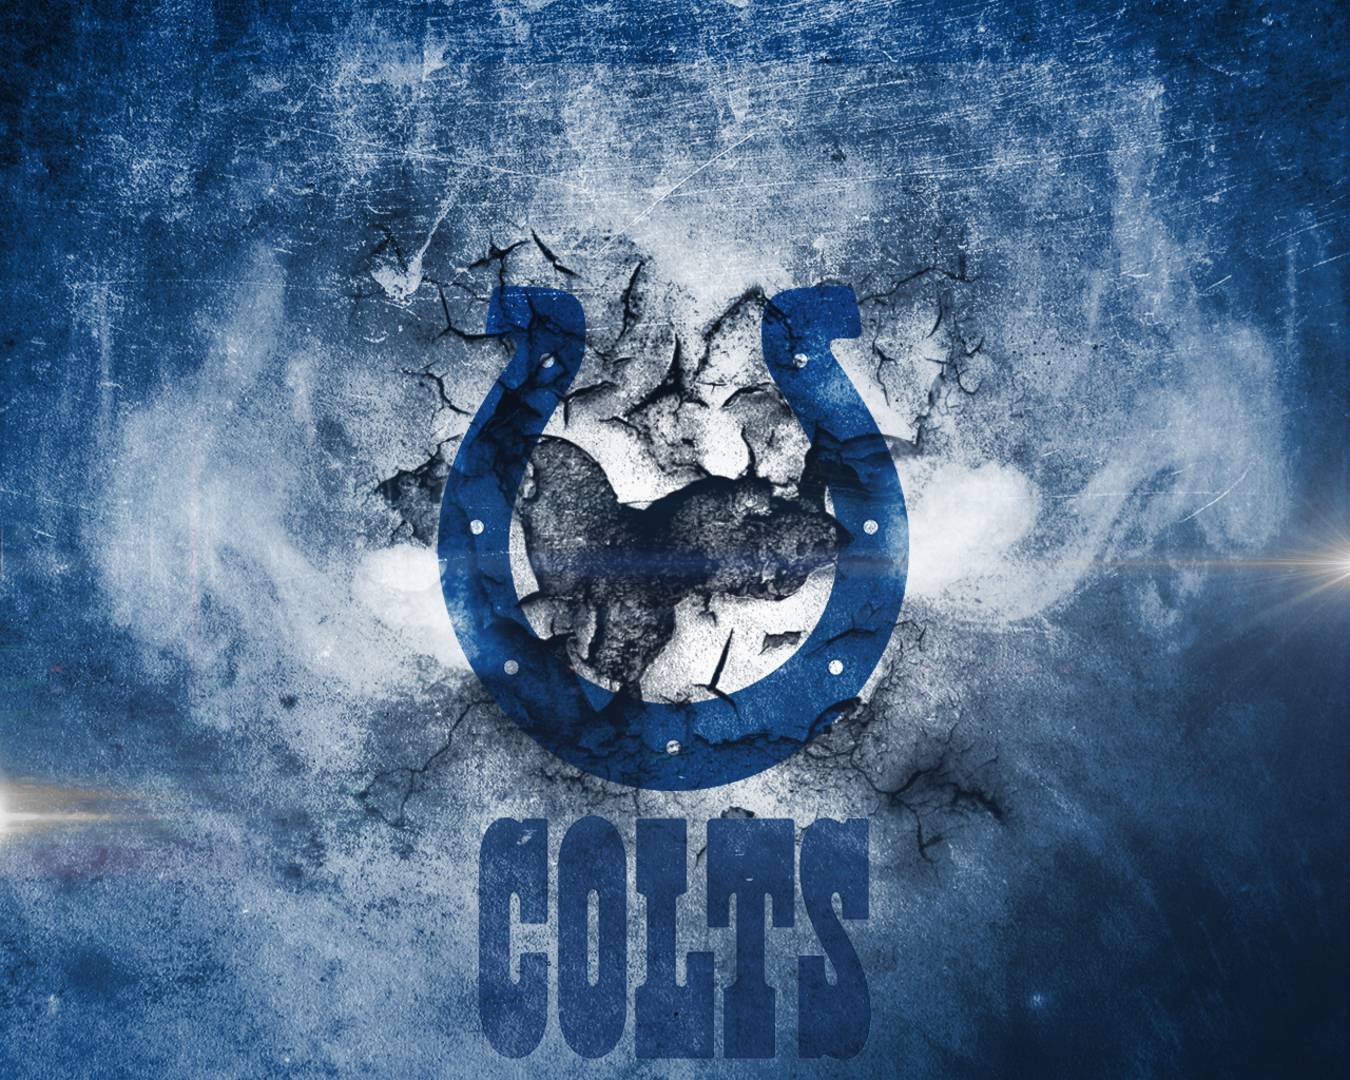 Indianapolis Colts Picture